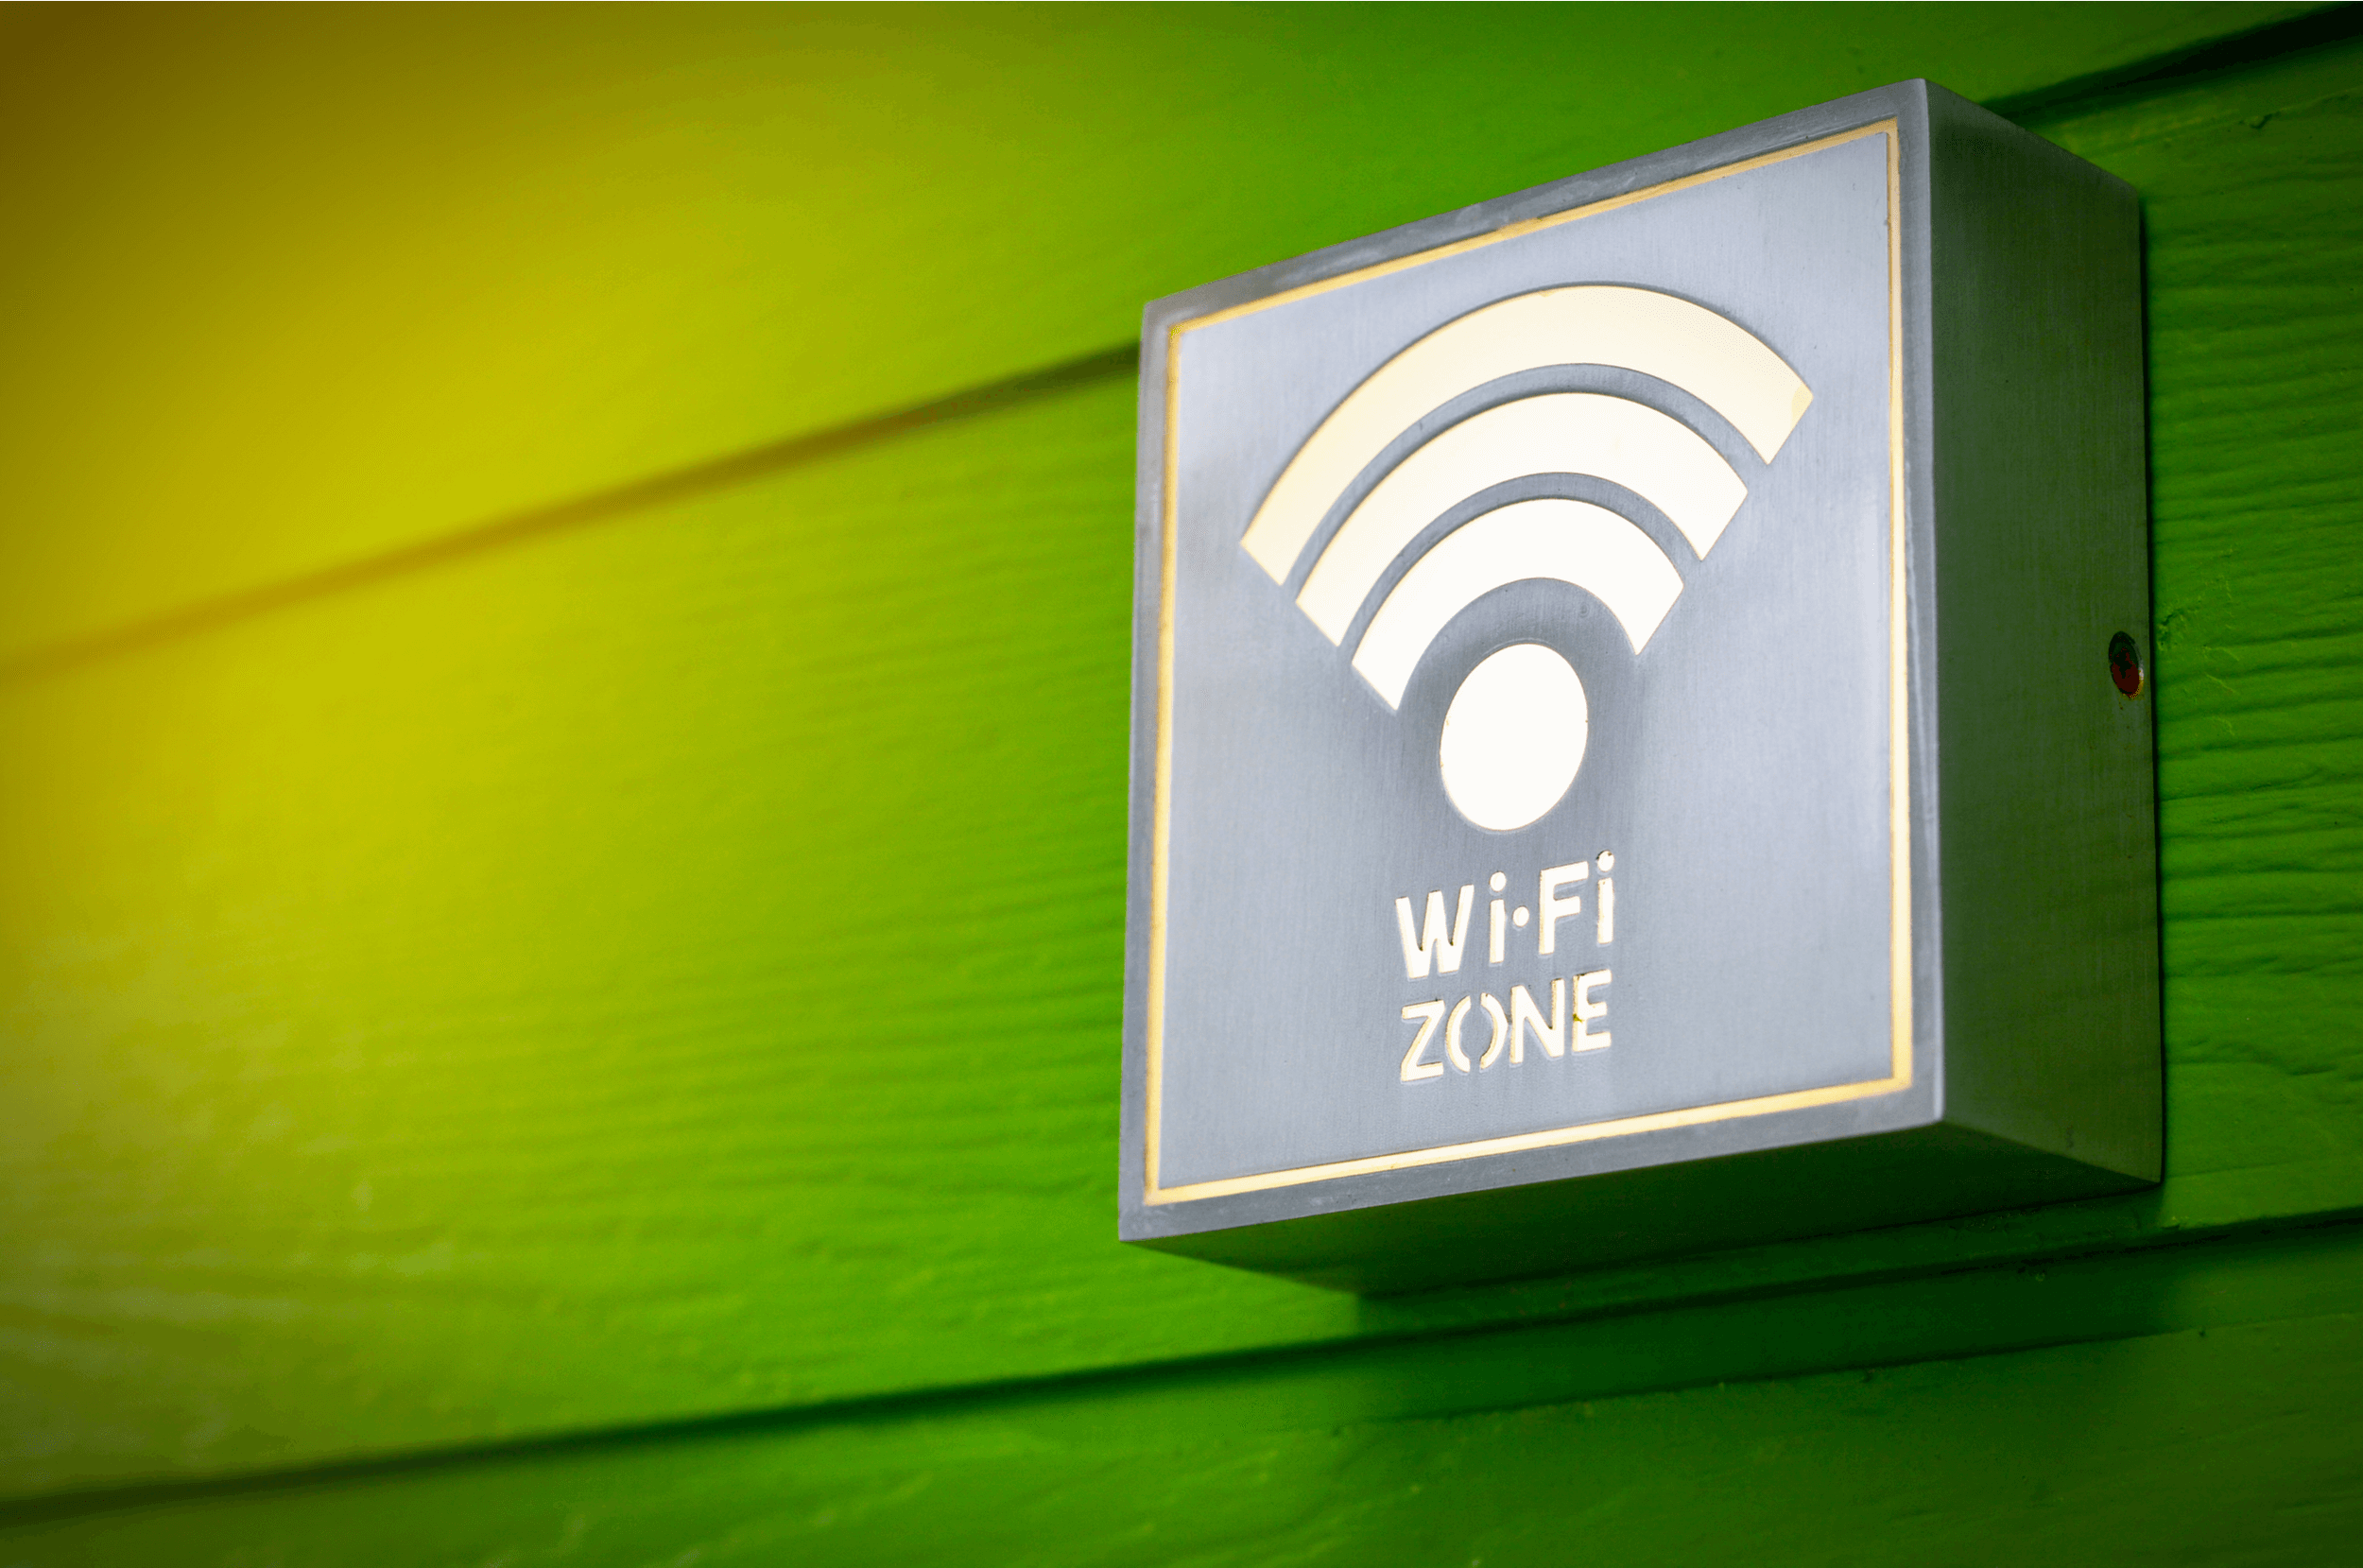 WiFi zone sign and symbol or Wifi area sign on the green wood background with softlight